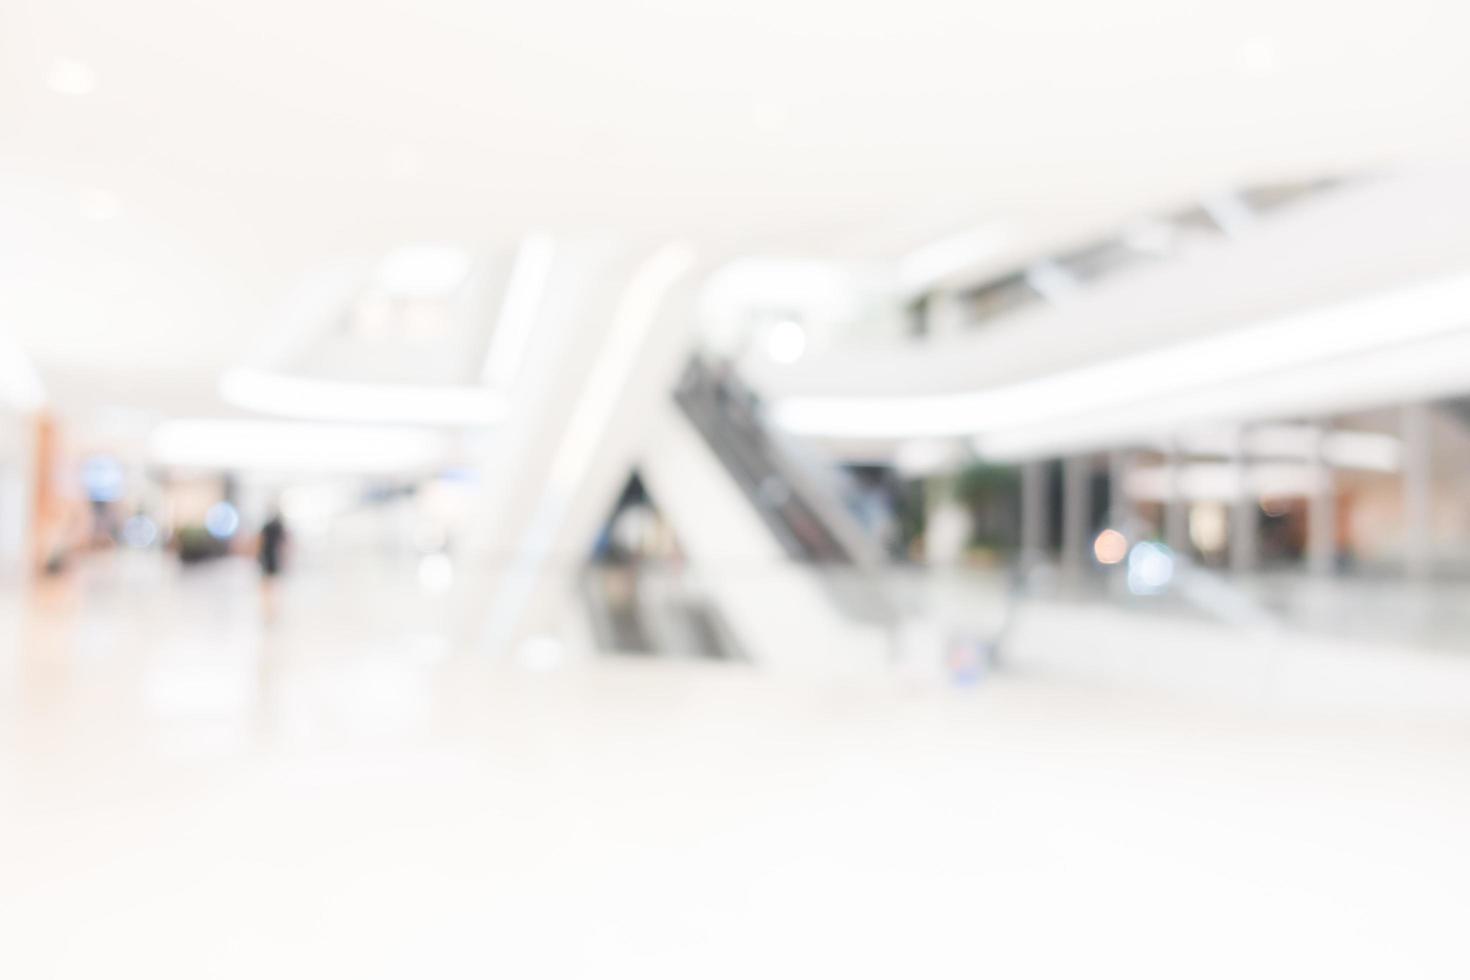 Abstract defocused shopping mall interior for background photo